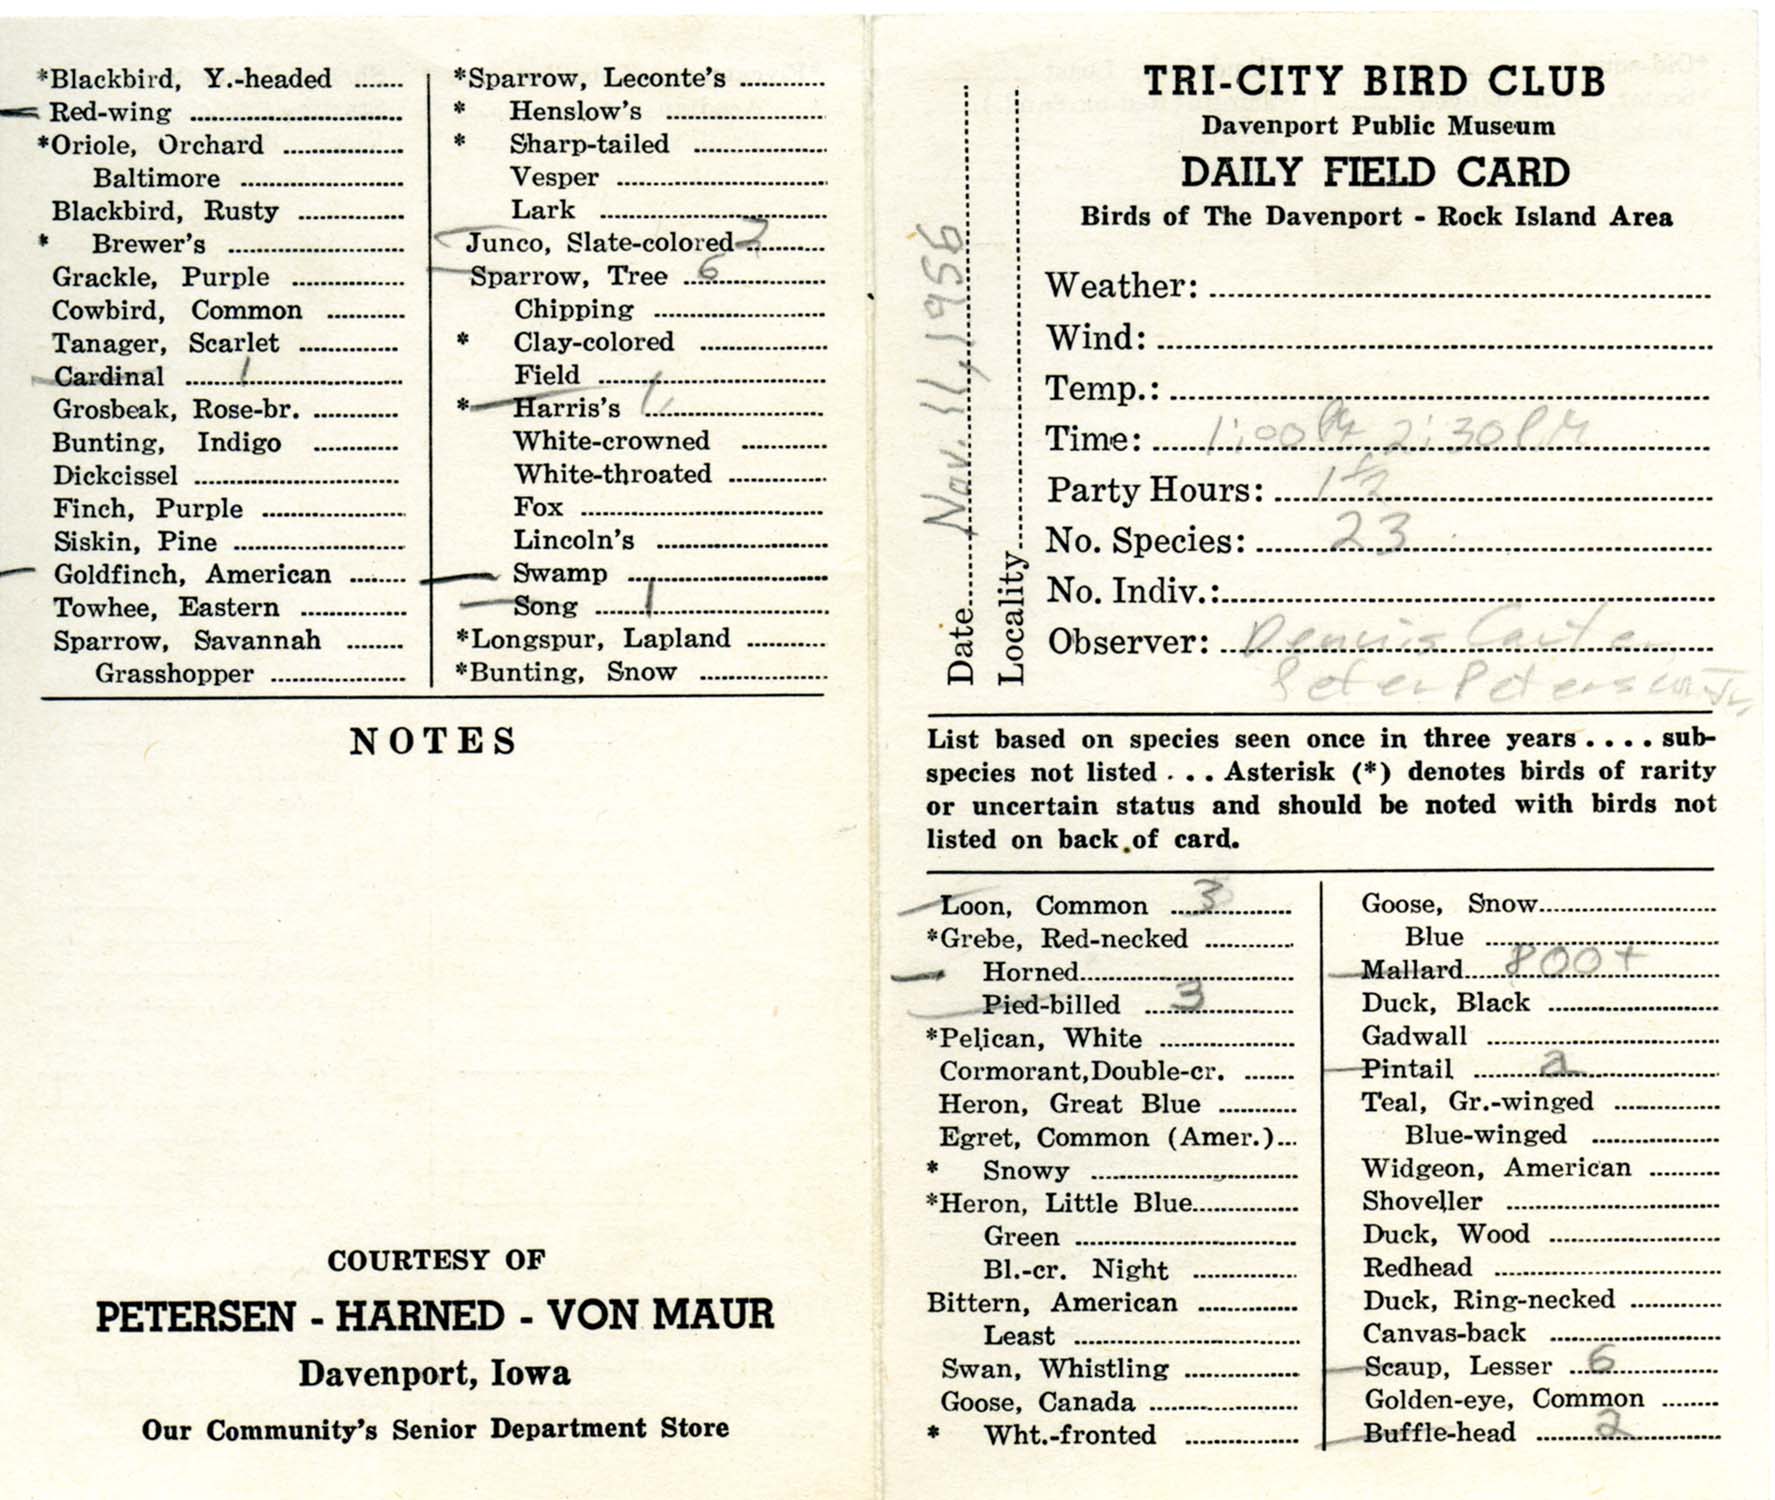 Tri-City bird checklist compiled by Dennis L. Carter and Peter C. Petersen, November 11, 1956